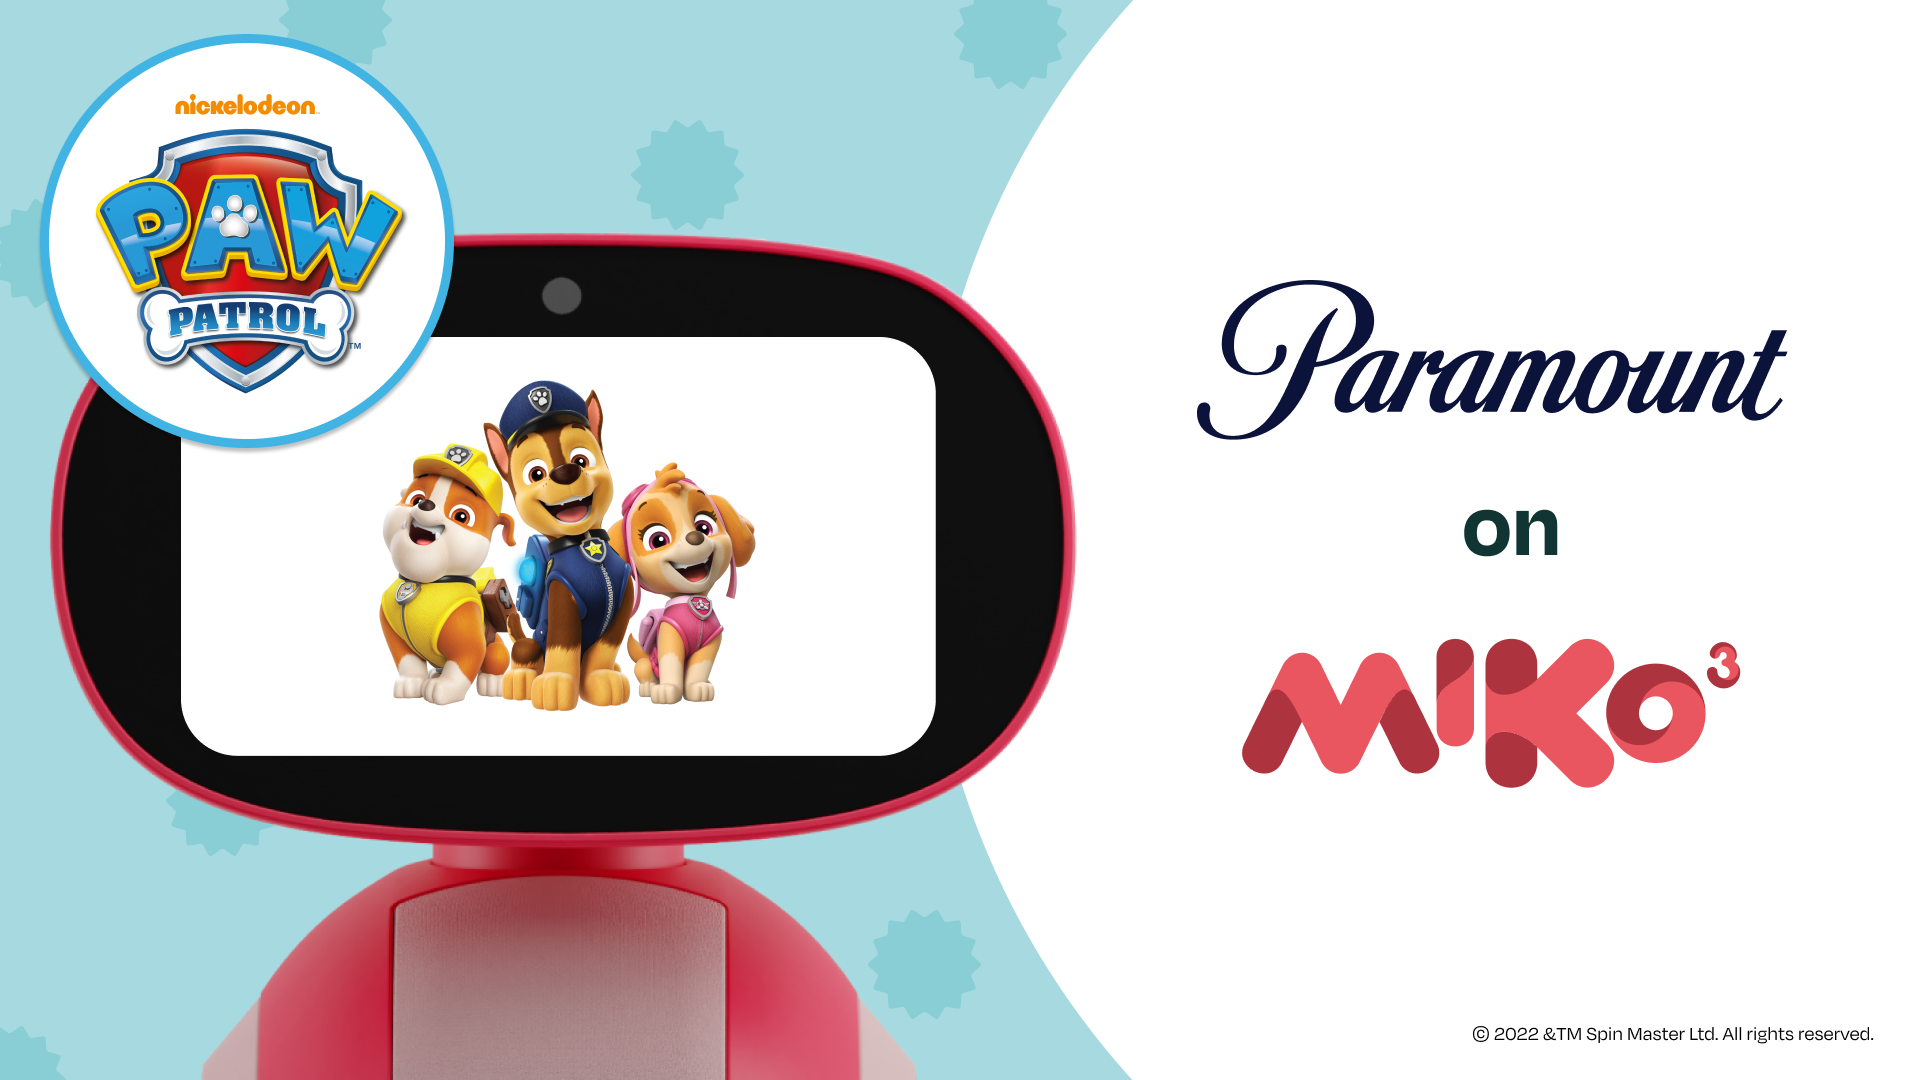 The PAW Patrol characters on Miko's screen shown next to the PAW Patrol logo and the text "Paramount on Miko 3."